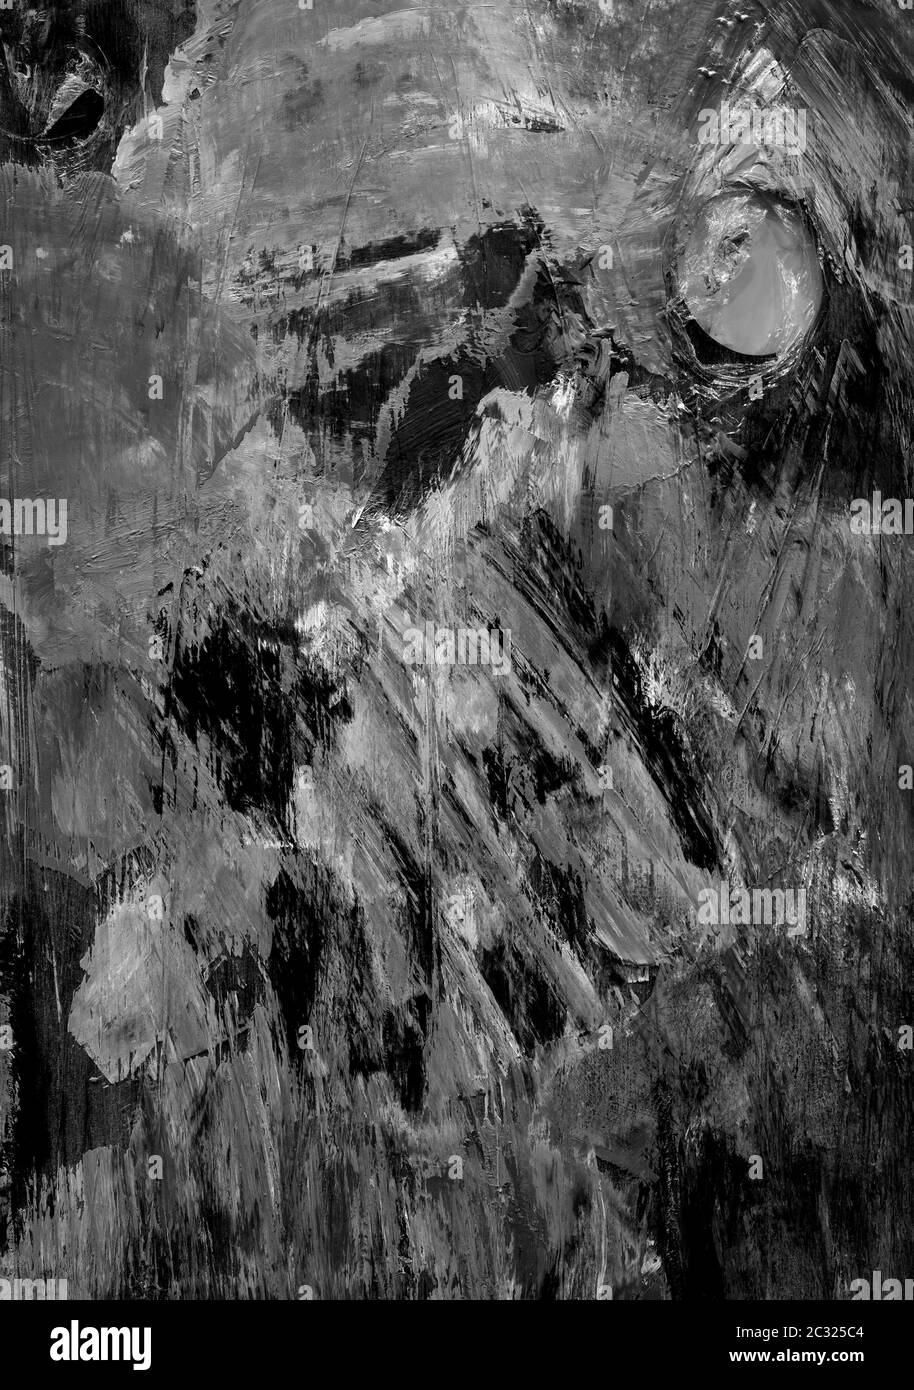 Oil painting texture Black and White Stock Photos & Images - Alamy